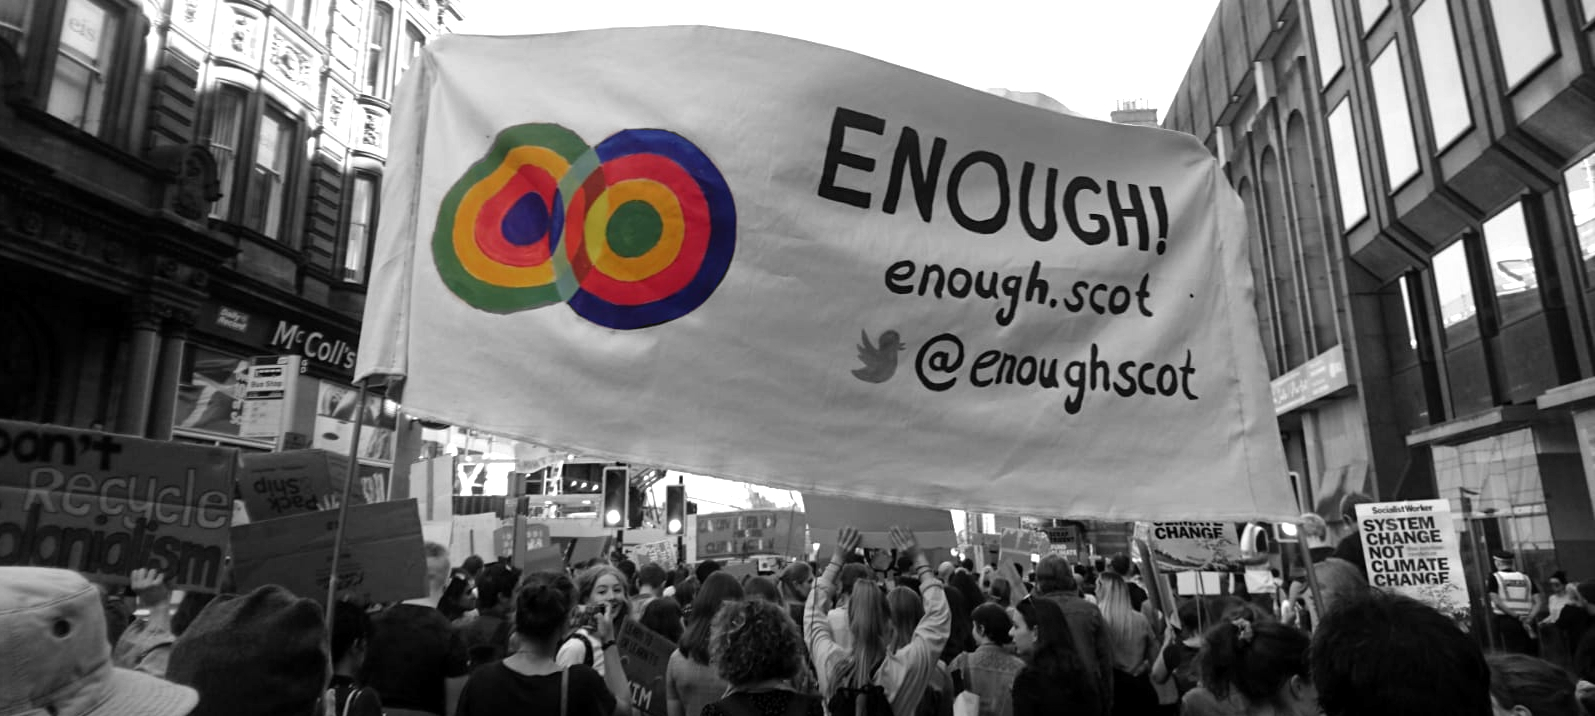 Enough! is an informal collective of activists in Scotland who have come together to take action on challenging our dominant economic system. We believe that inequality, oppression, injustice, power and ecological breakdown are all connected by the same story: